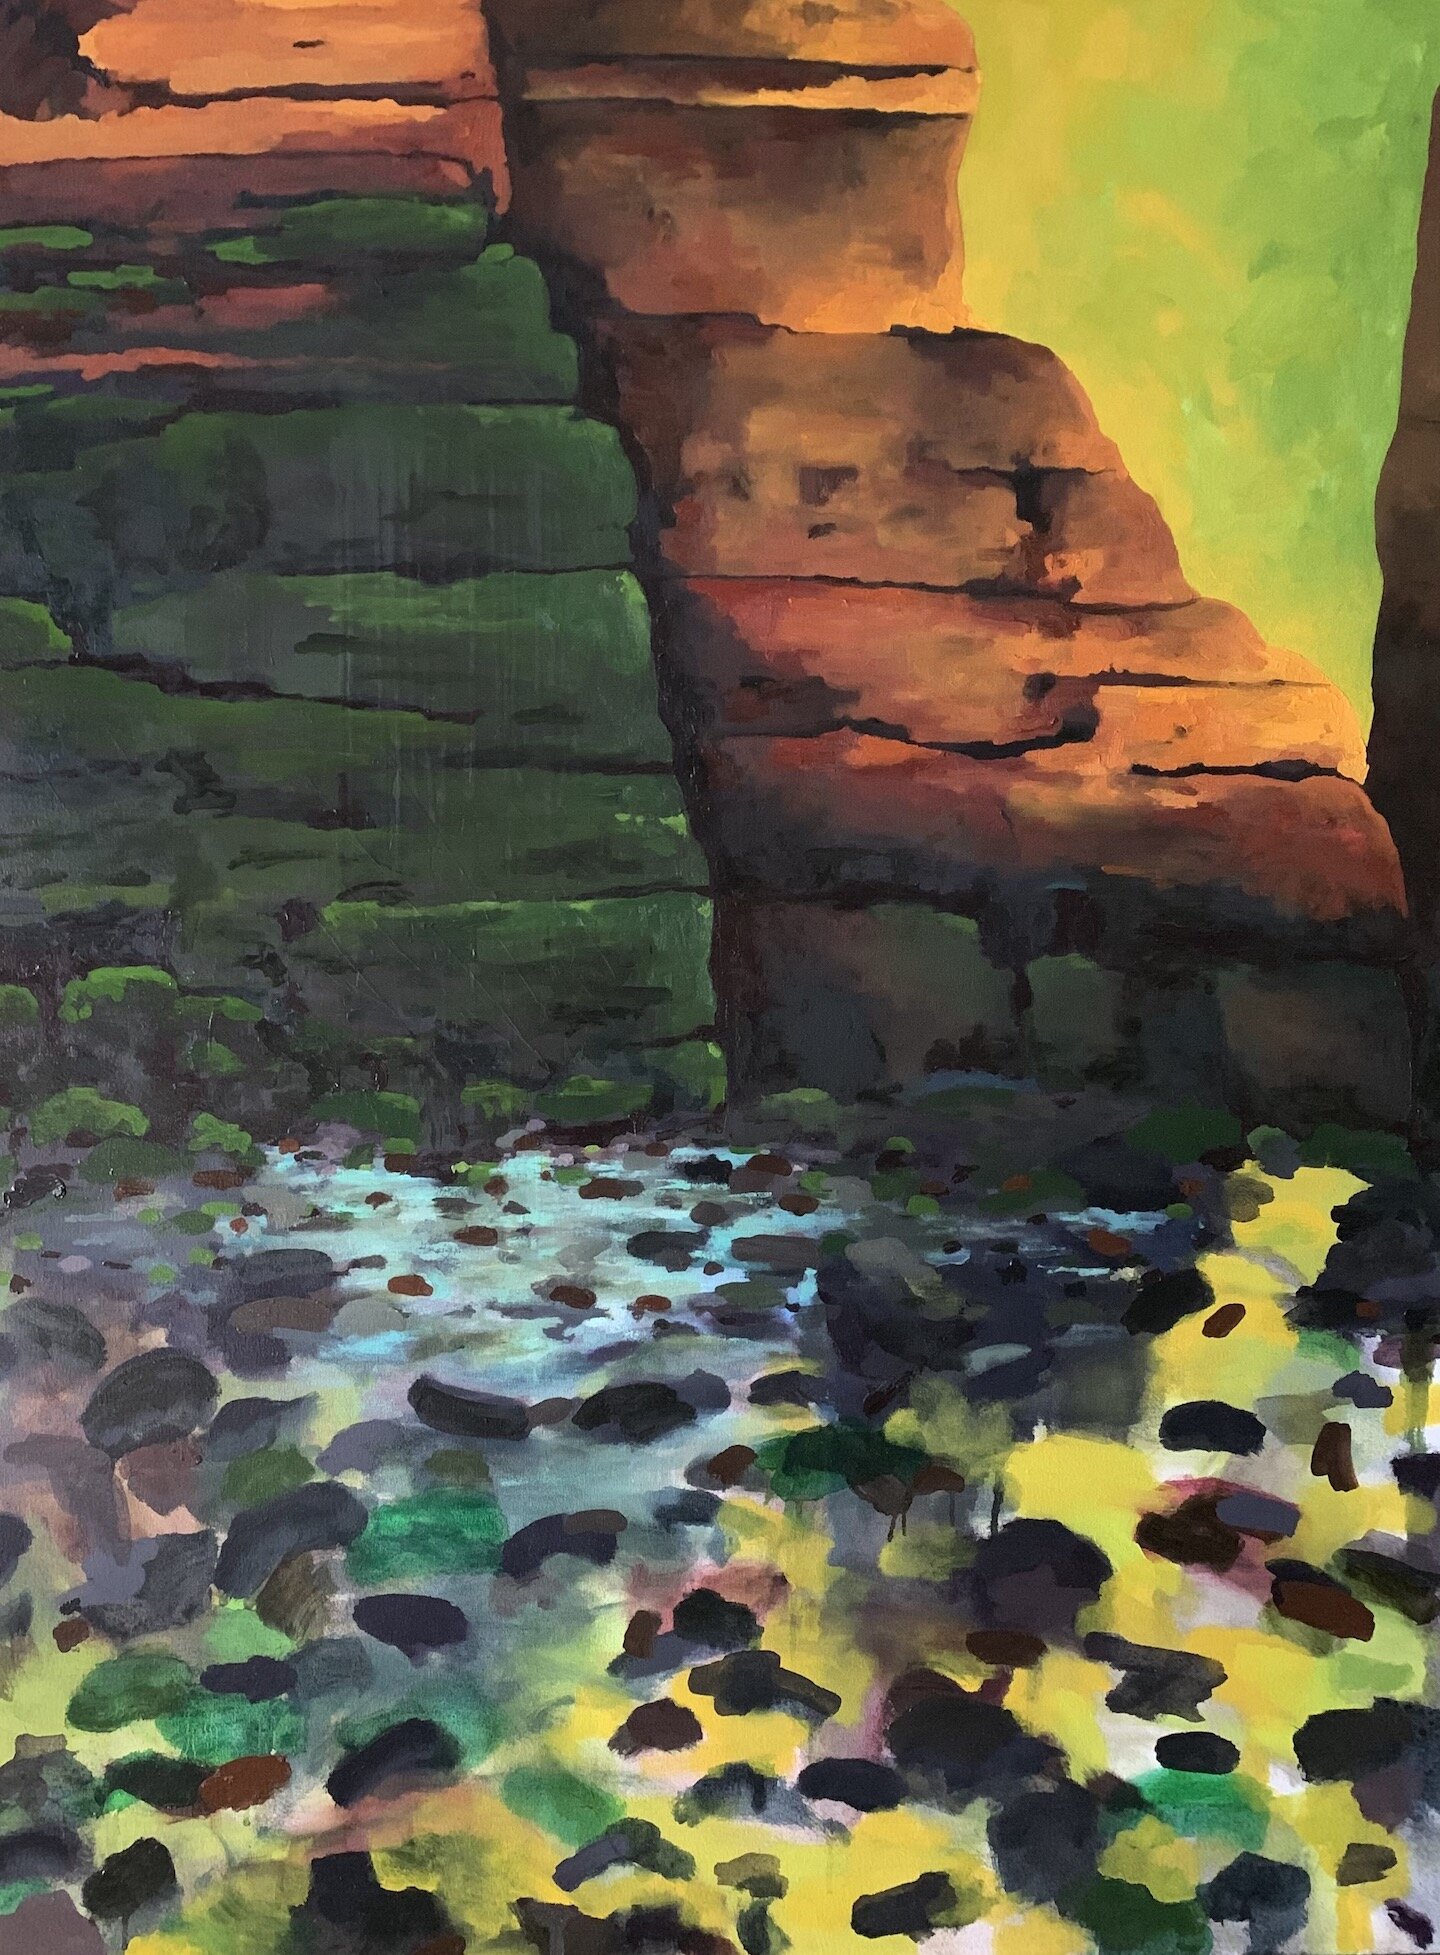    Crevice  , 48” x 36”, oil on canvas 